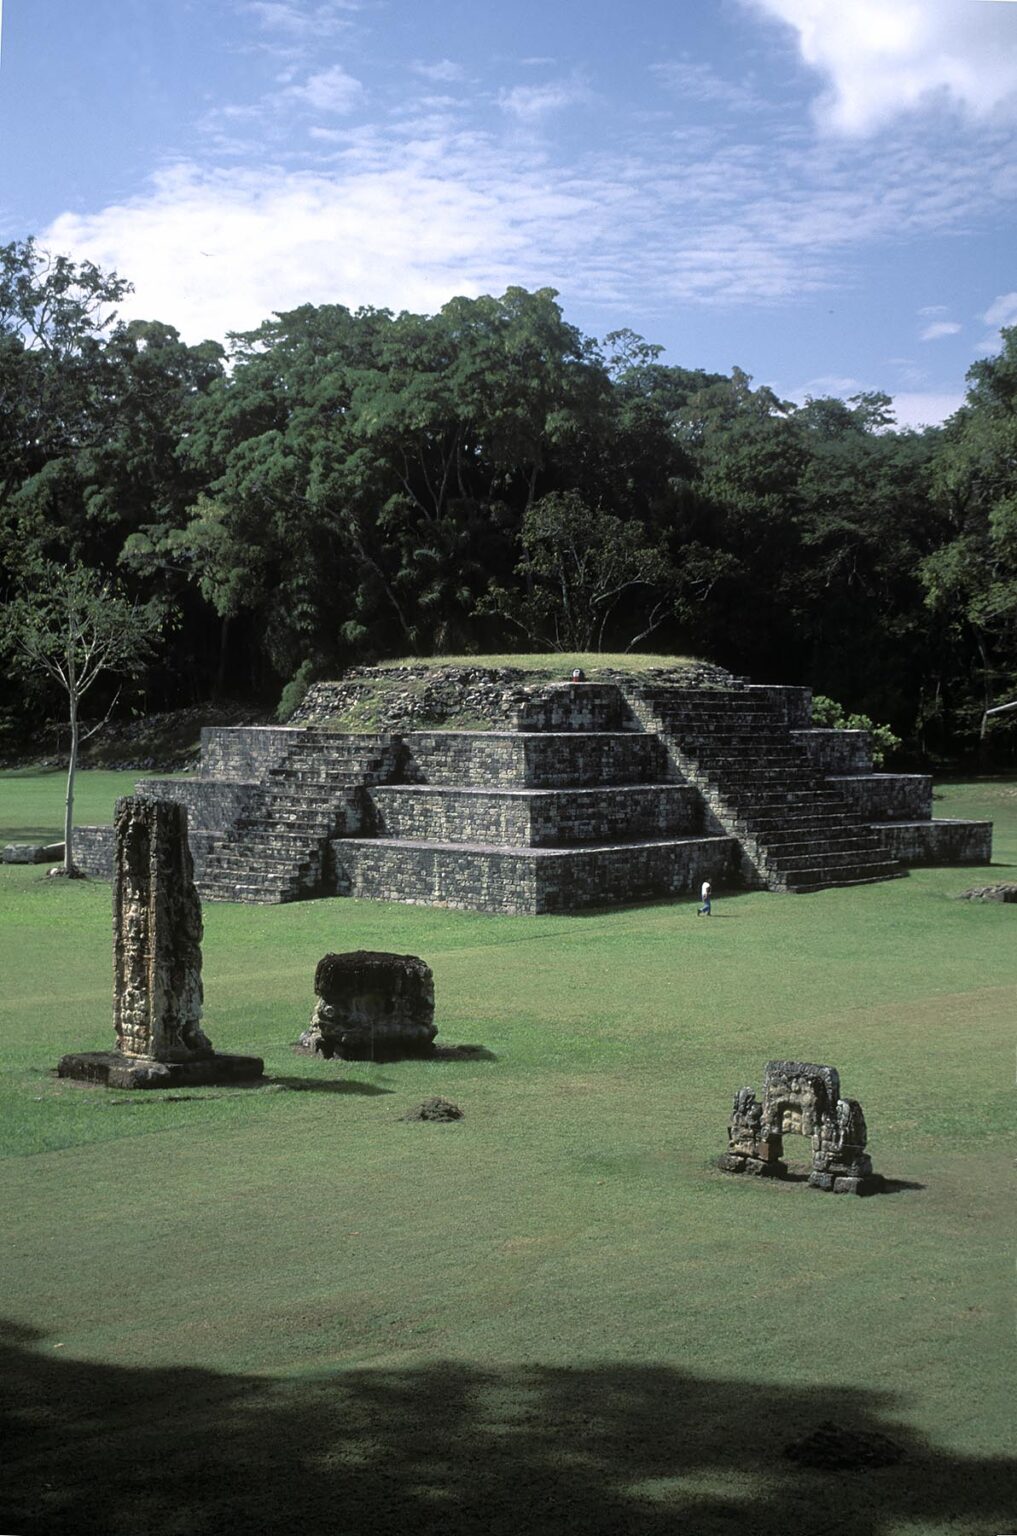 PYRAMID in the CEREMONIAL COURT, or GREAT PLAZA, an example of MAYAN ARCHITECTURE - COPAN RUINS, HONDURAS